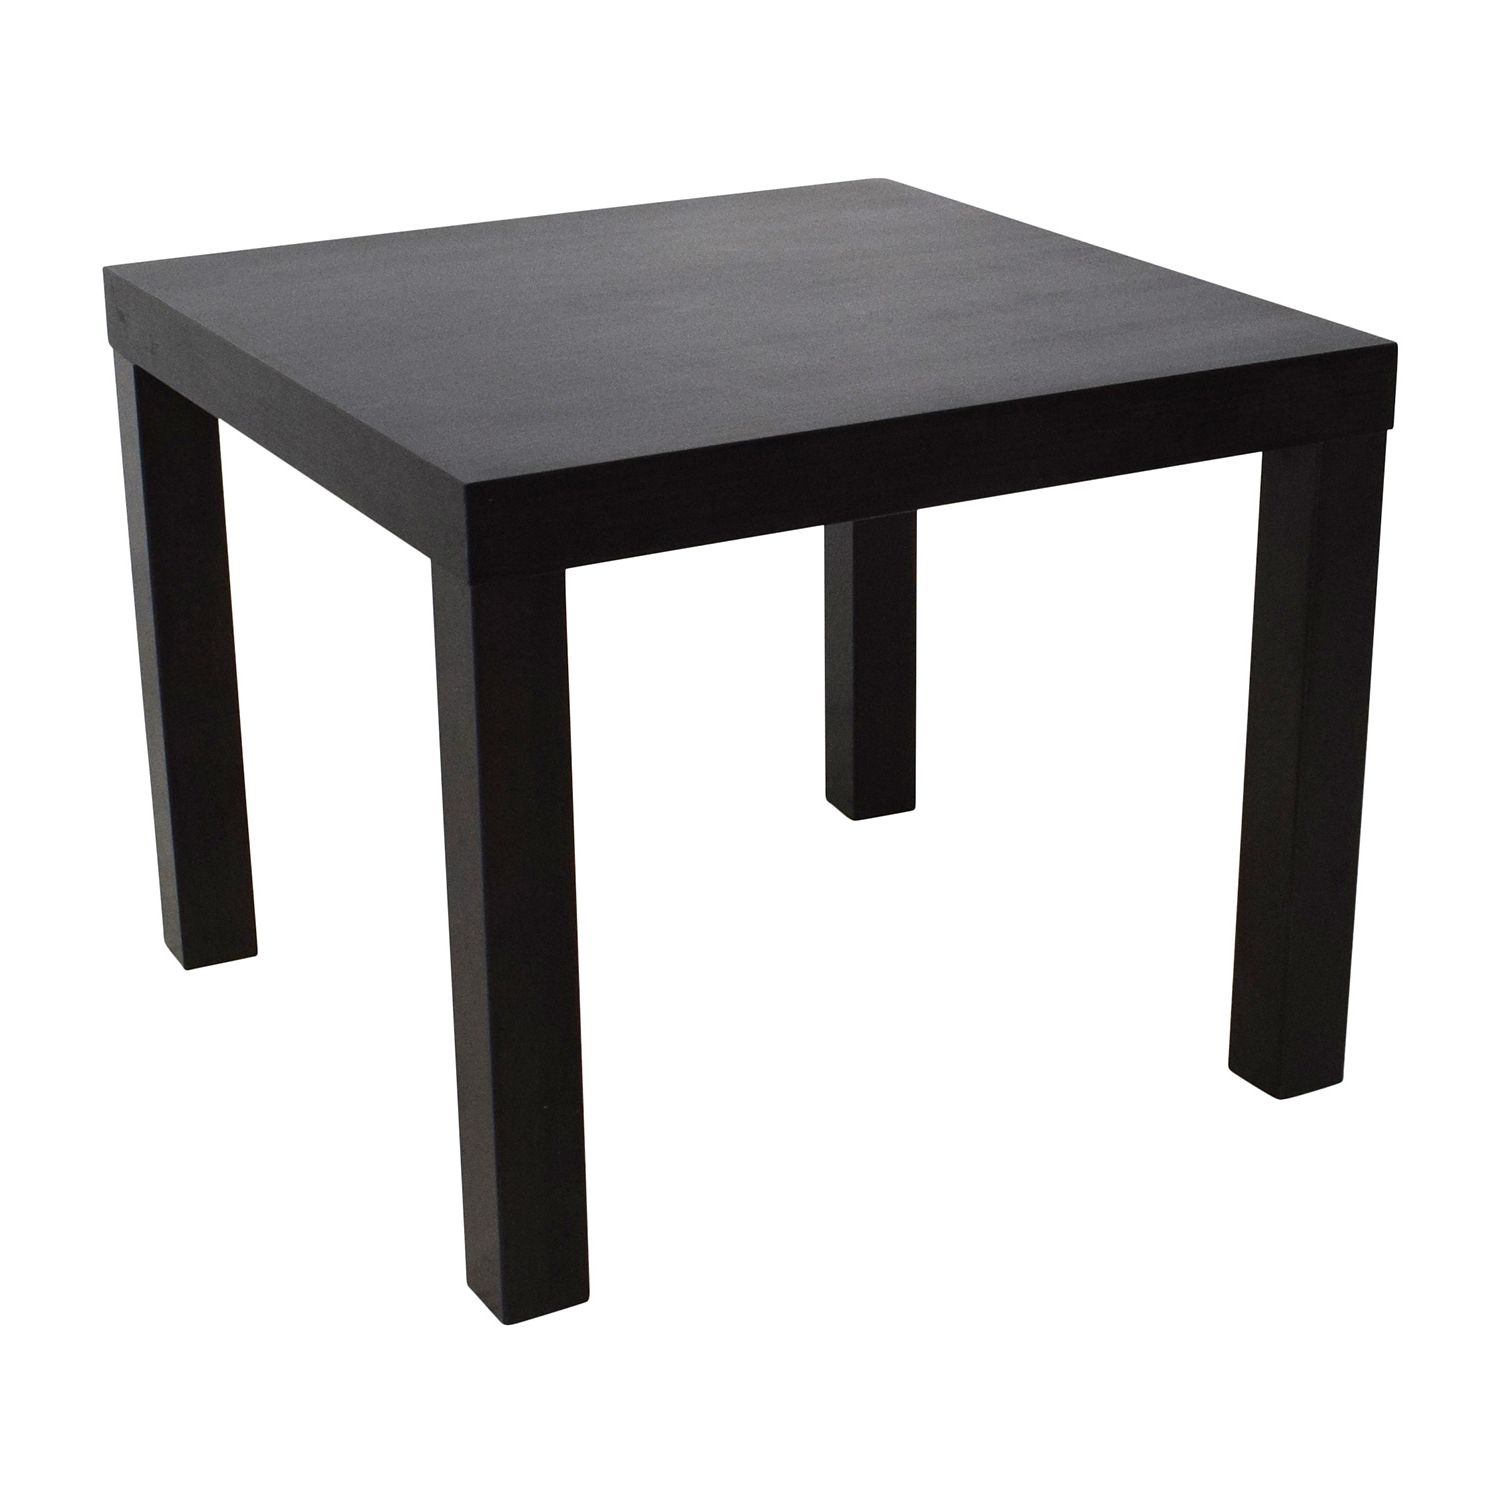 [%80% Off – Black Coffee Table / Tables Pertaining To 2018 Black And White Coffee Tables|black And White Coffee Tables Inside Most Up To Date 80% Off – Black Coffee Table / Tables|best And Newest Black And White Coffee Tables For 80% Off – Black Coffee Table / Tables|2019 80% Off – Black Coffee Table / Tables Intended For Black And White Coffee Tables%] (View 14 of 20)